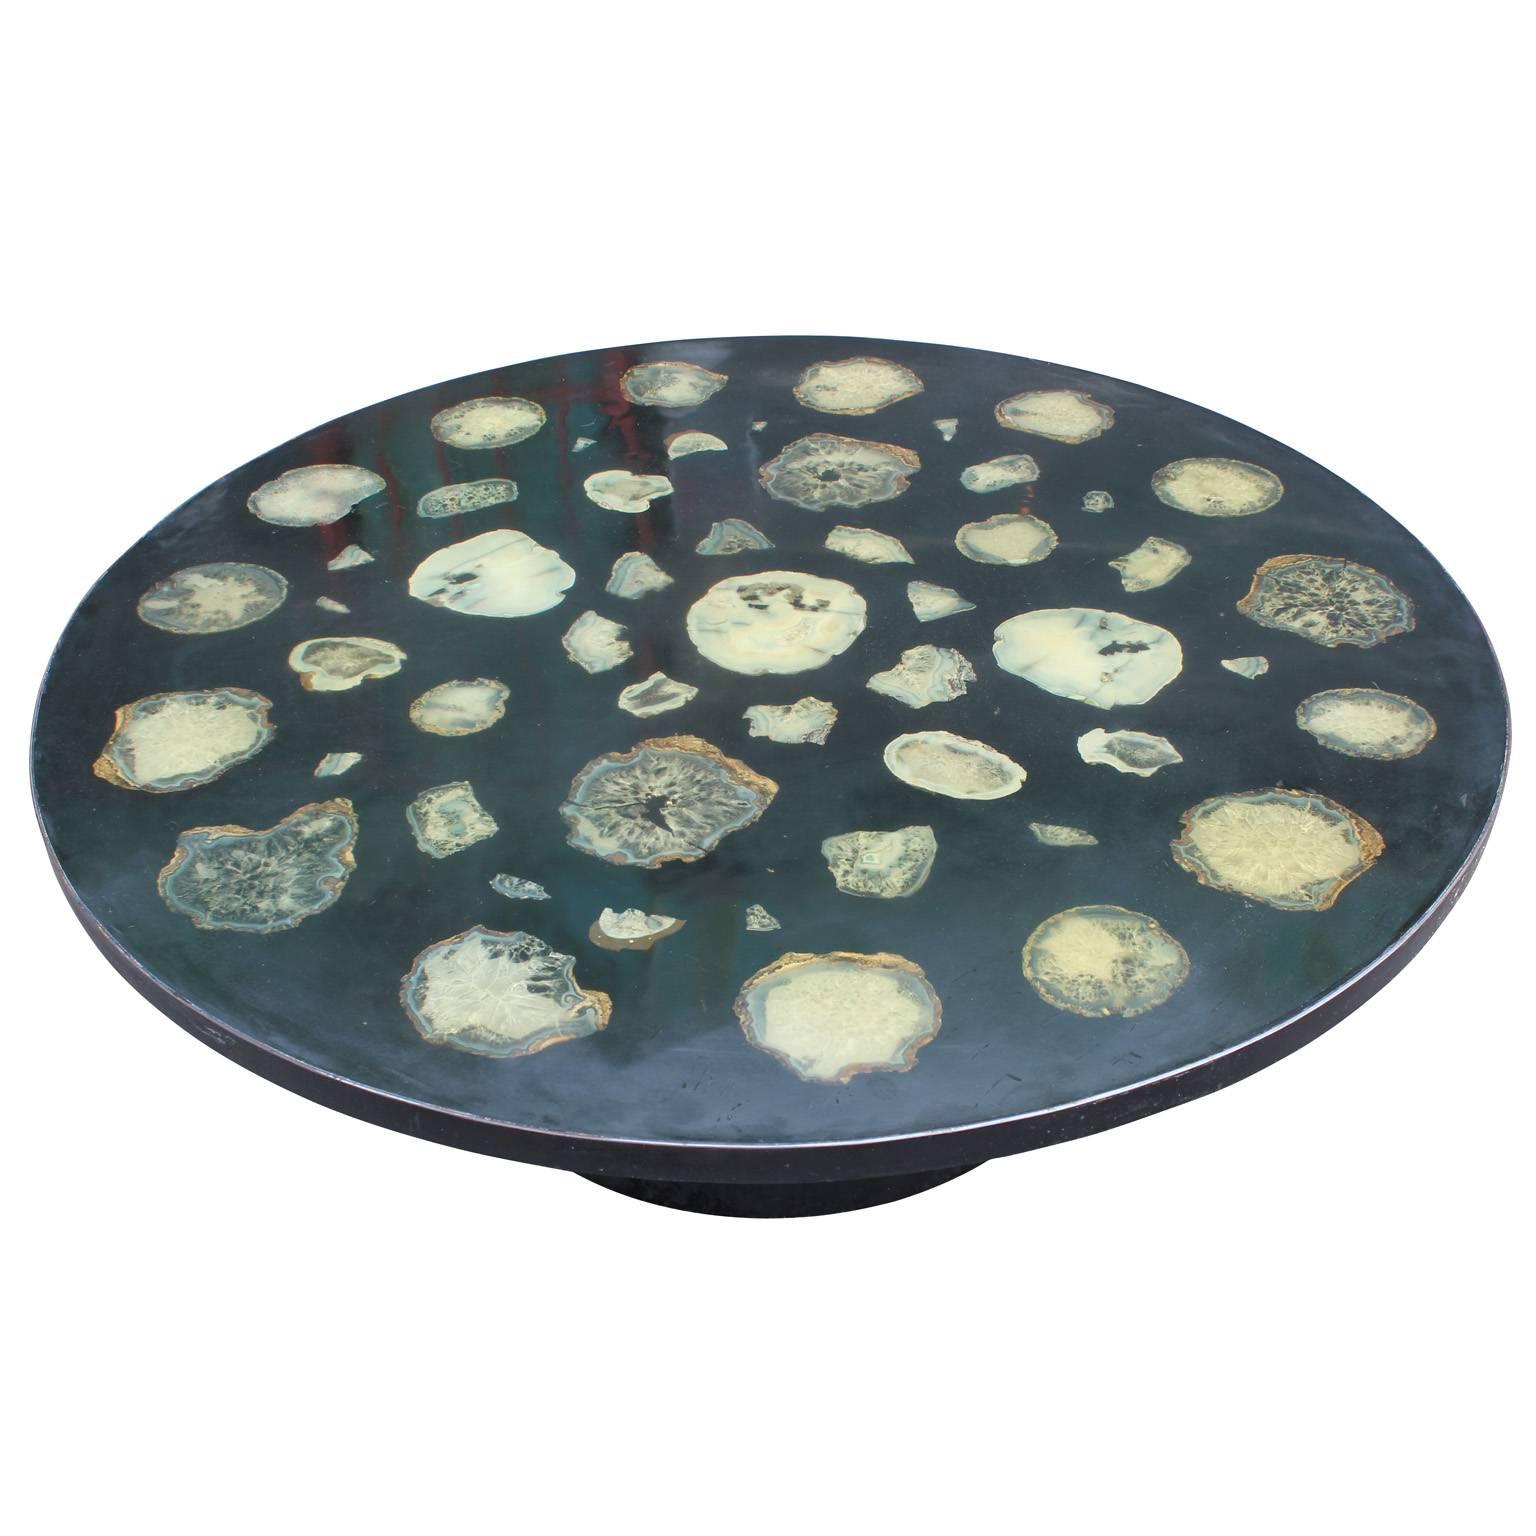 Stunning round coffee table. Table top features sliced agate artfully arranged in resin. Table top rests on a steel drum base. A fabulous statement piece for any space. Attributed to famed artist Ado Chale.